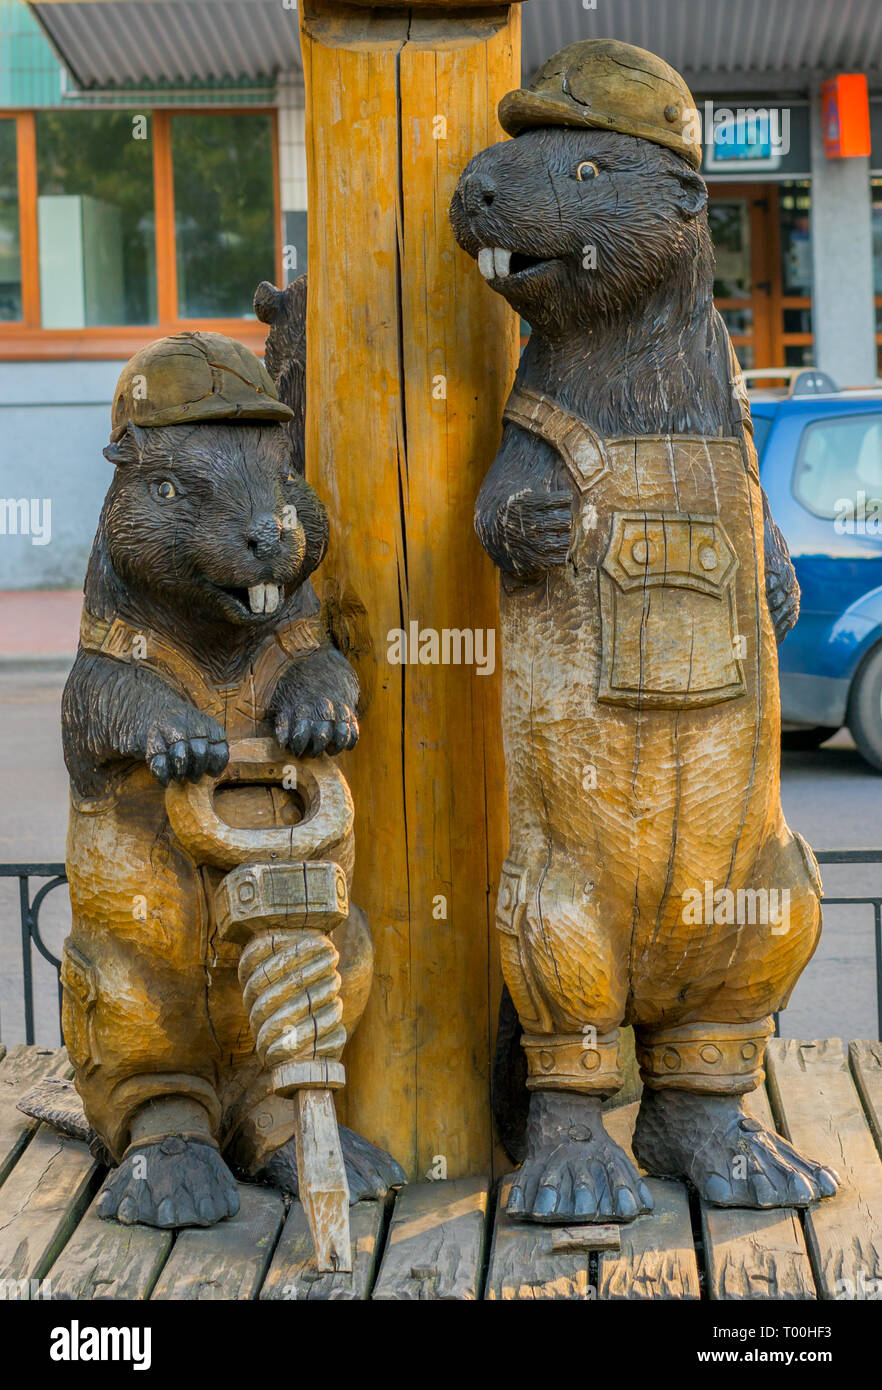 Brest, Belarus - July 28, 2018: Animal figures (beavers) carved from wood. Stock Photo